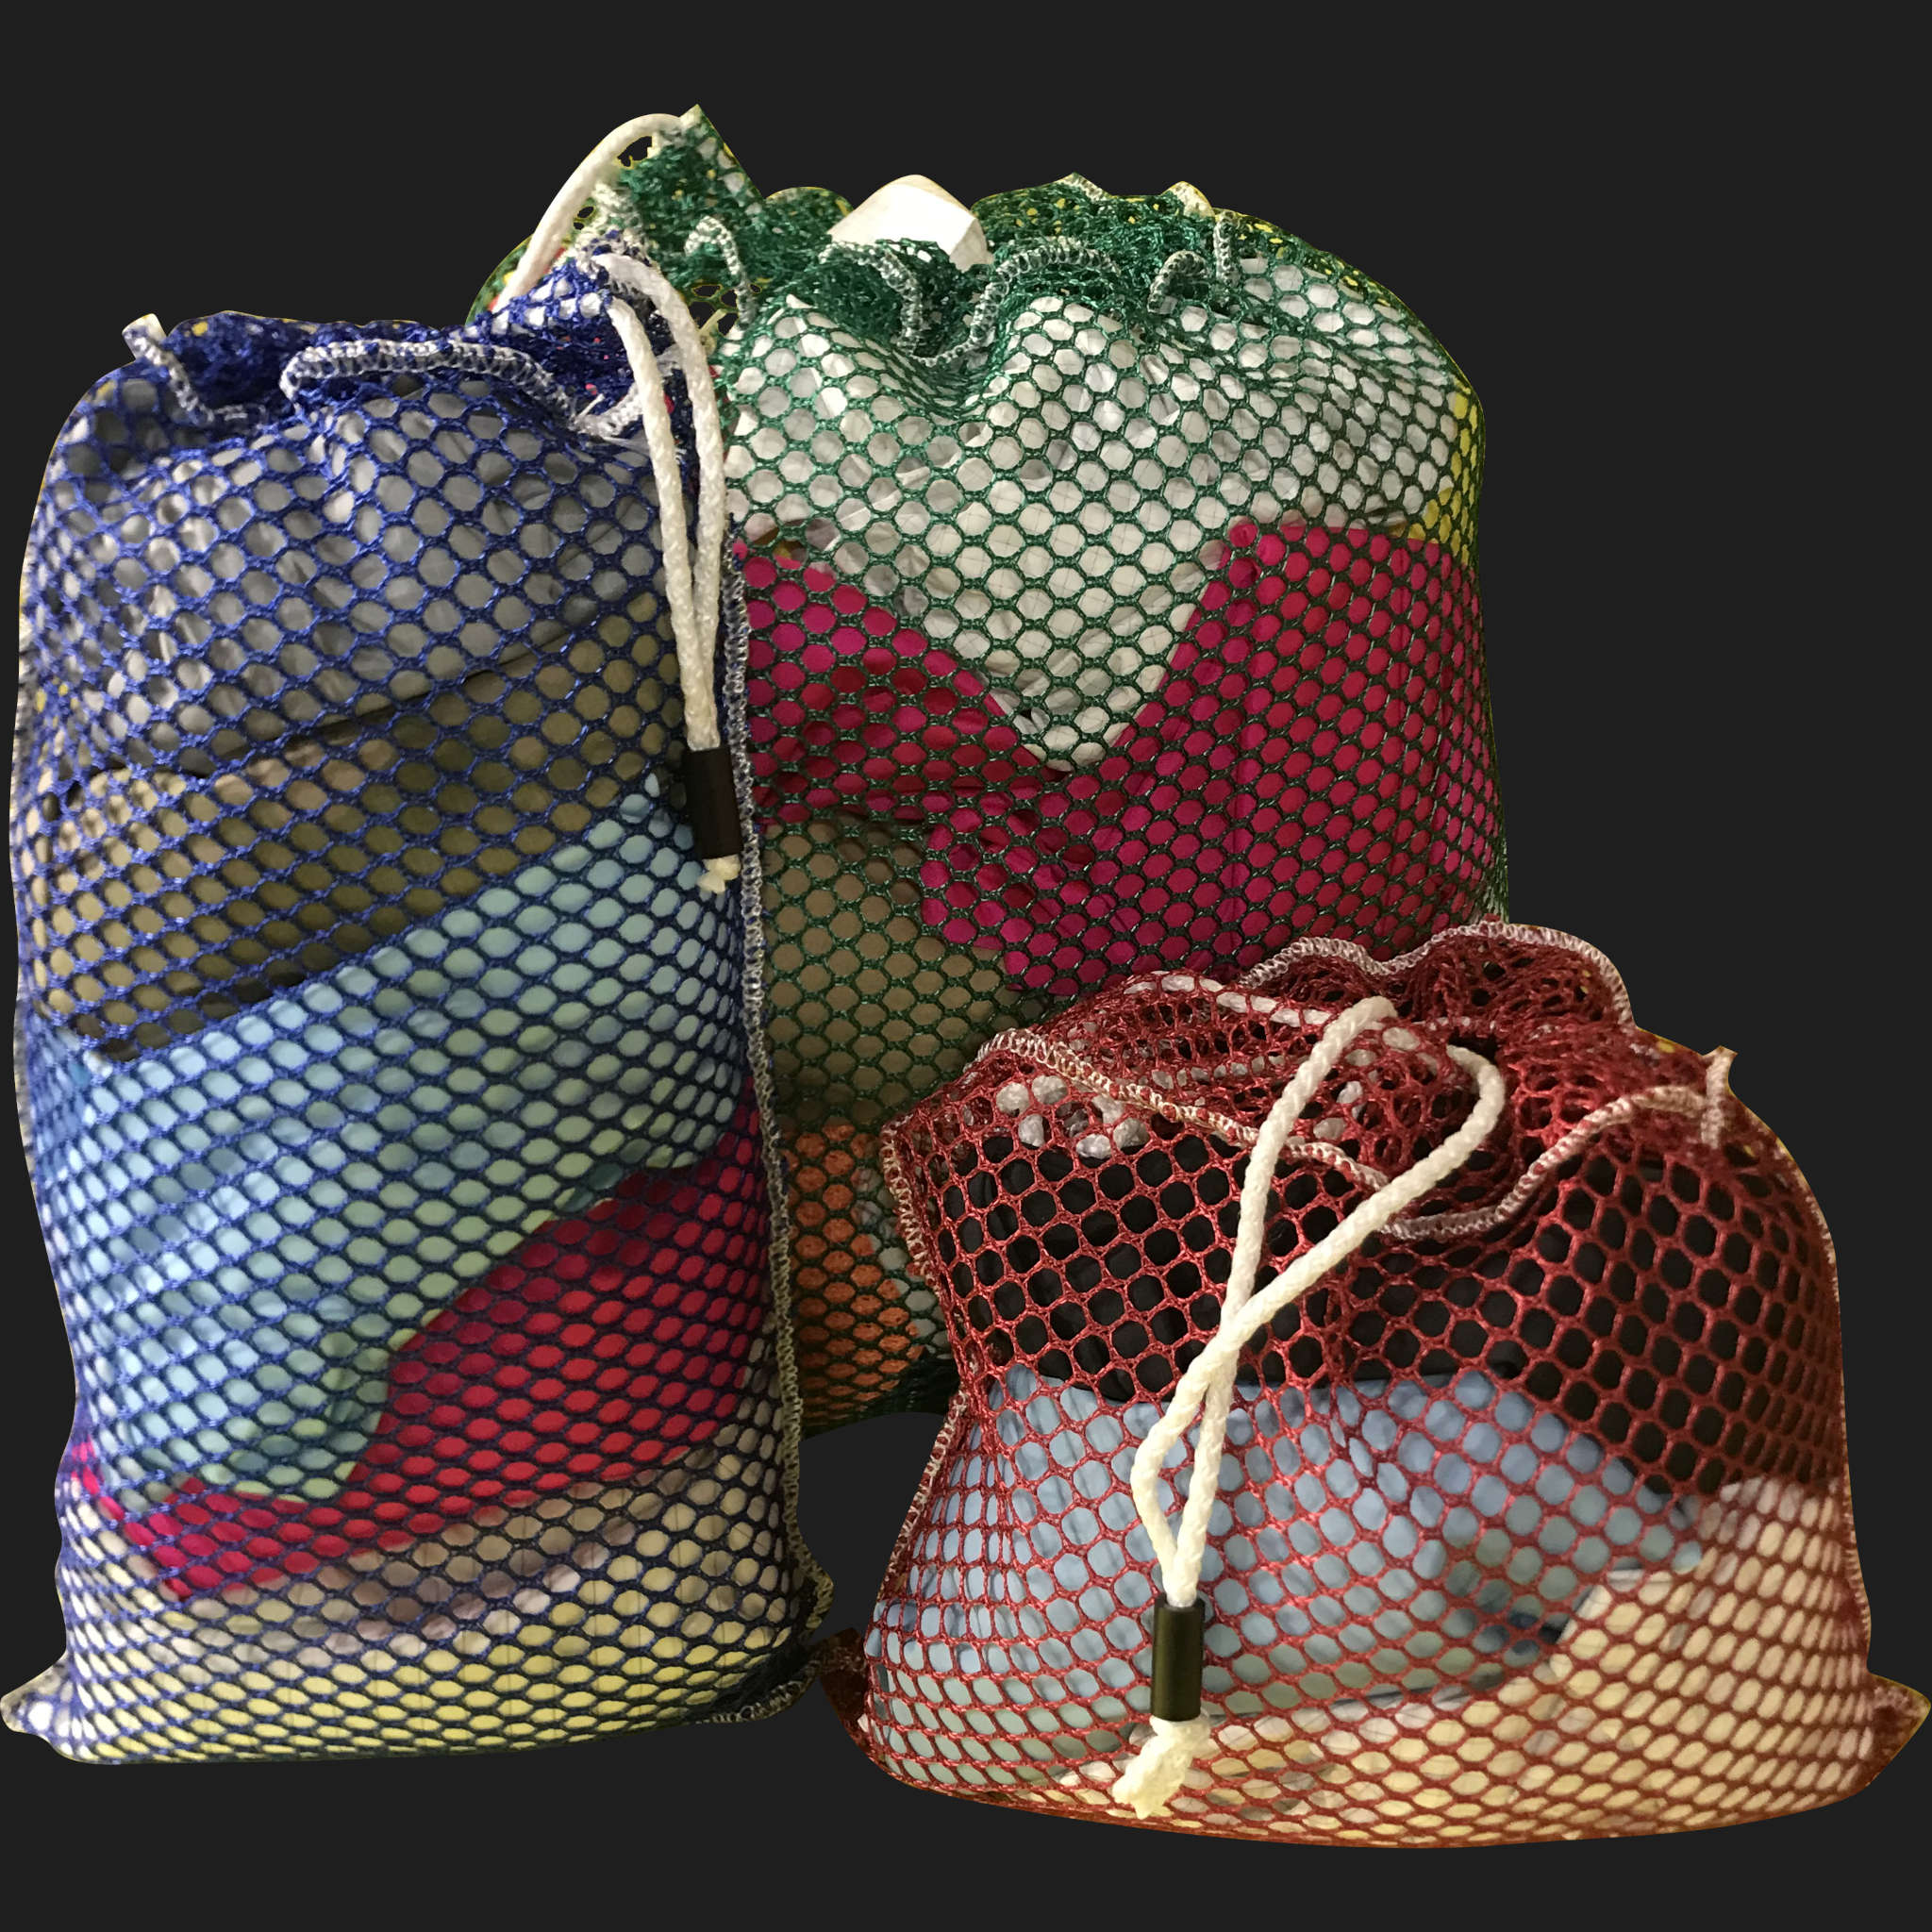 24" x 34" Customized Mesh-Net-Laundry Bags Heavy Duty with Cord and barrellock closure